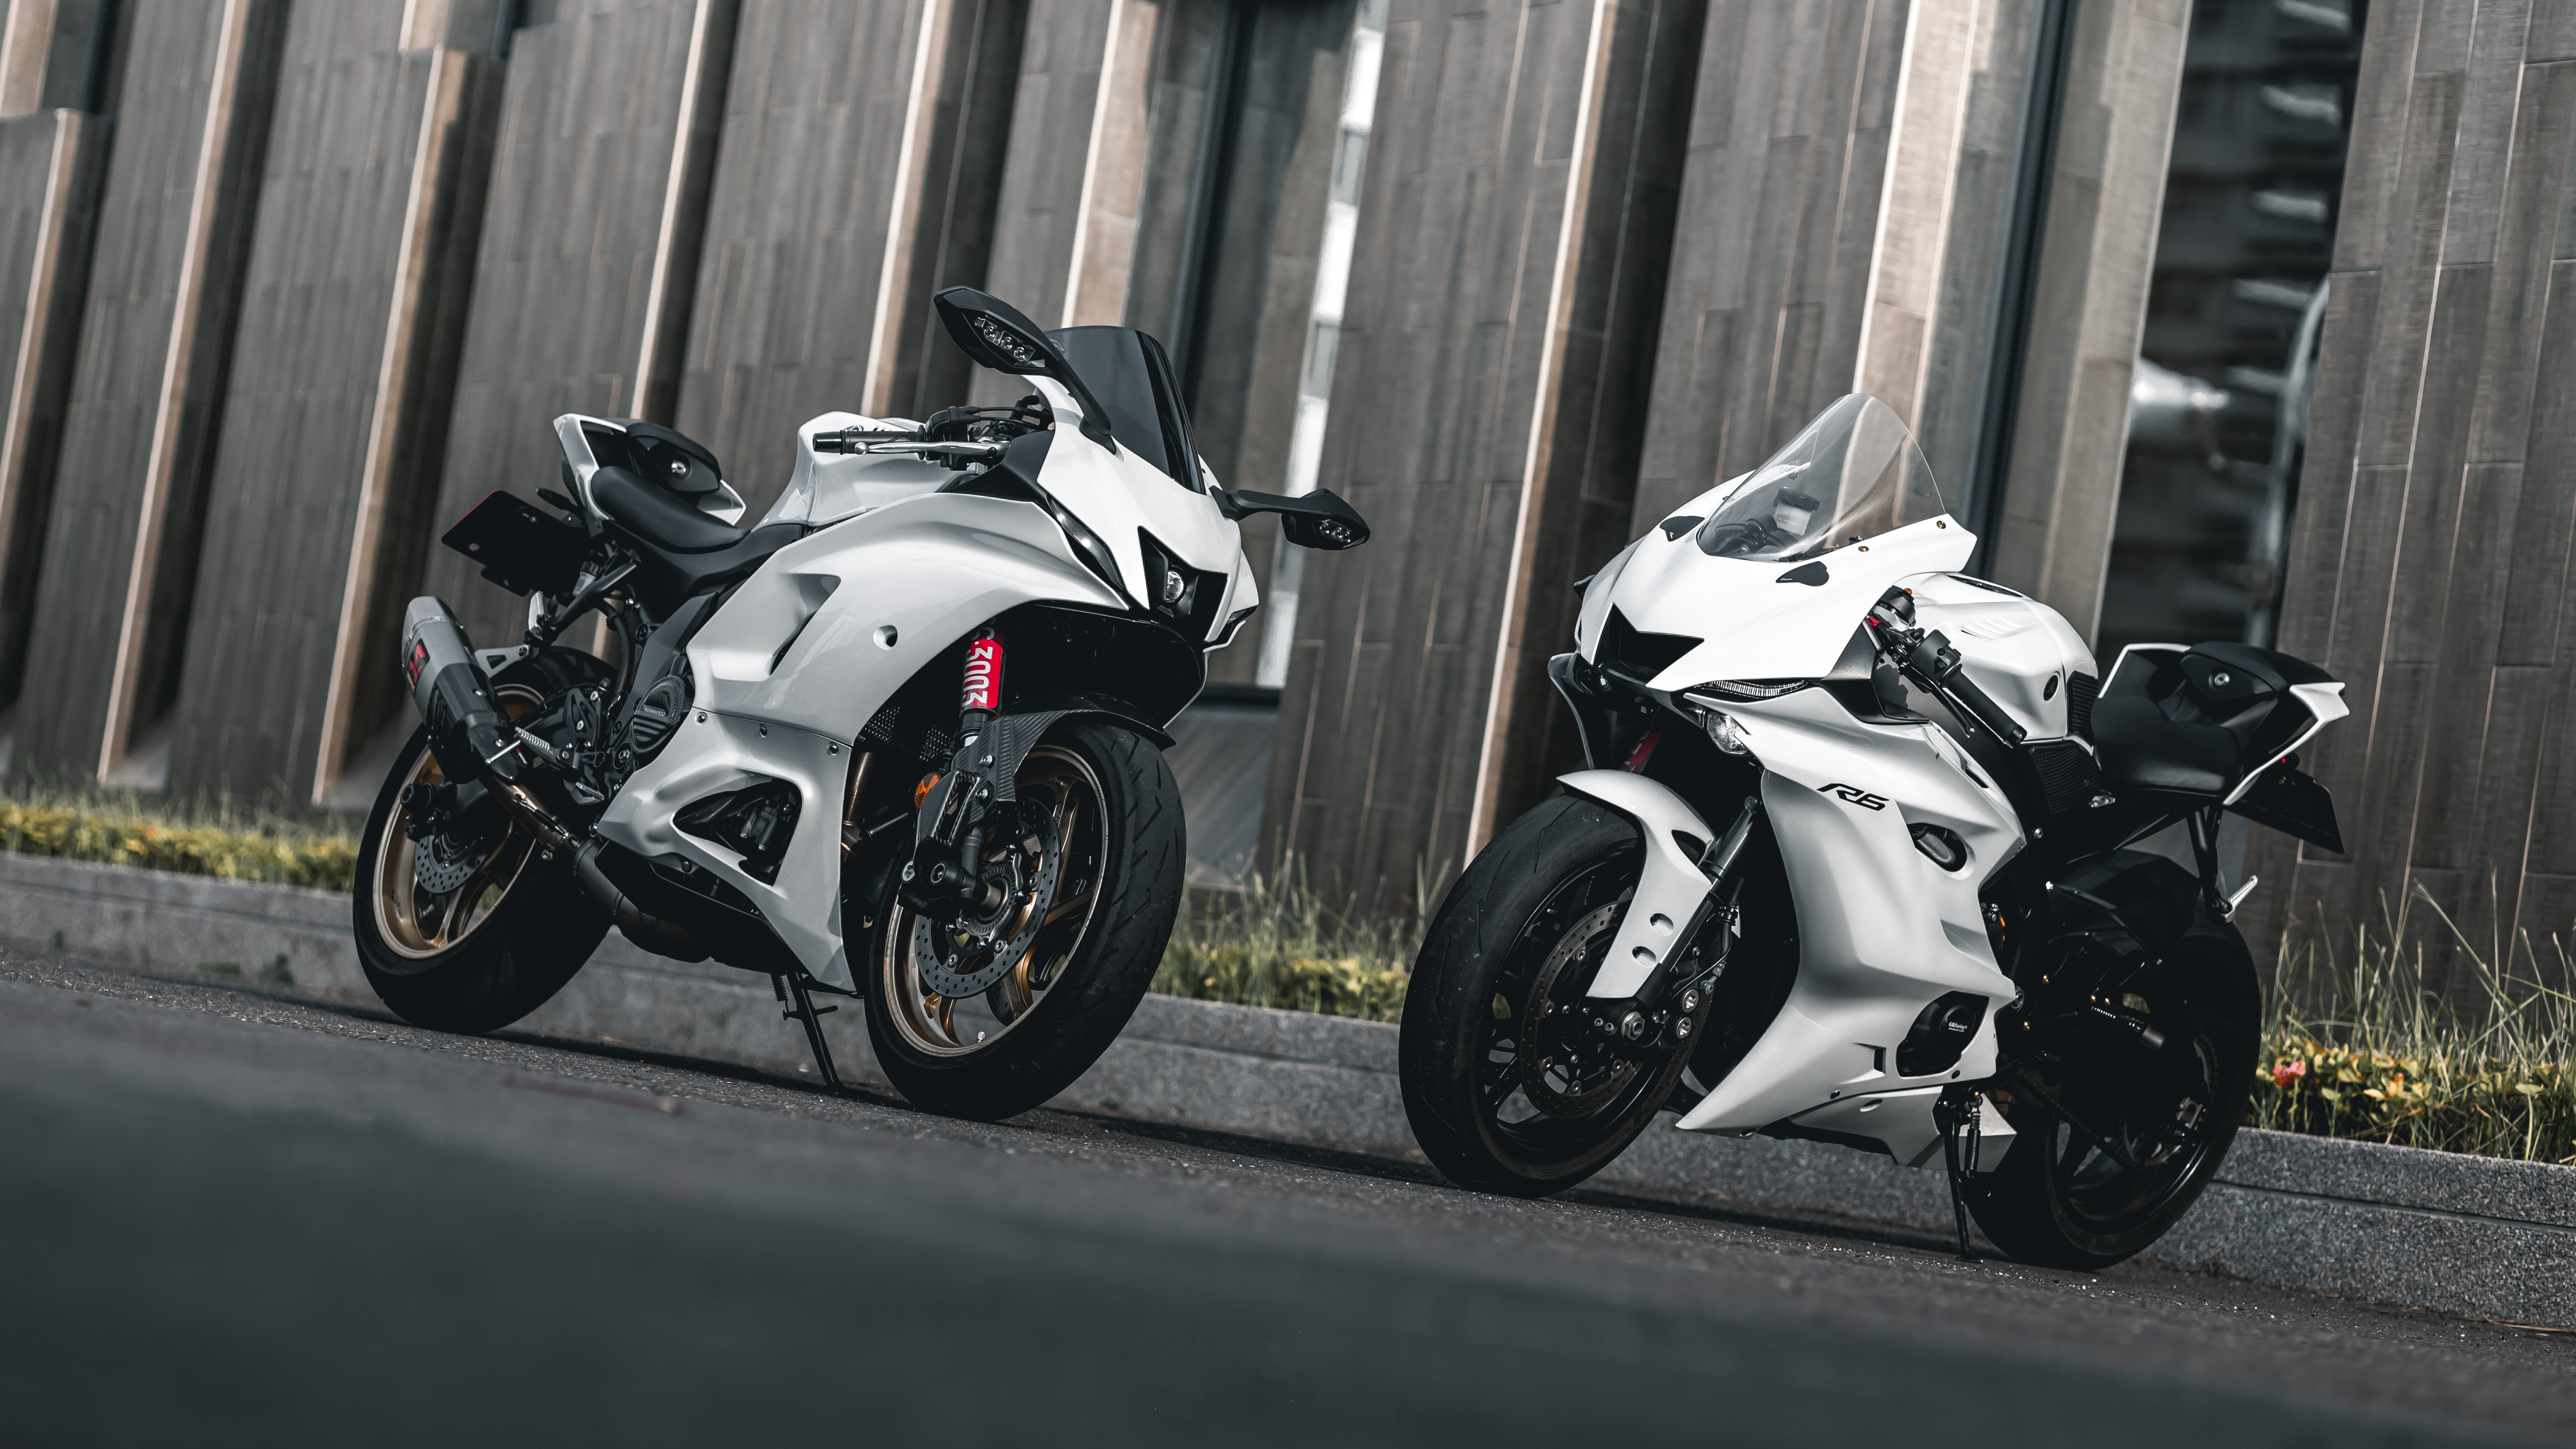 Two white Yamaha yzf-r7 and yzf-r6 motorcycles